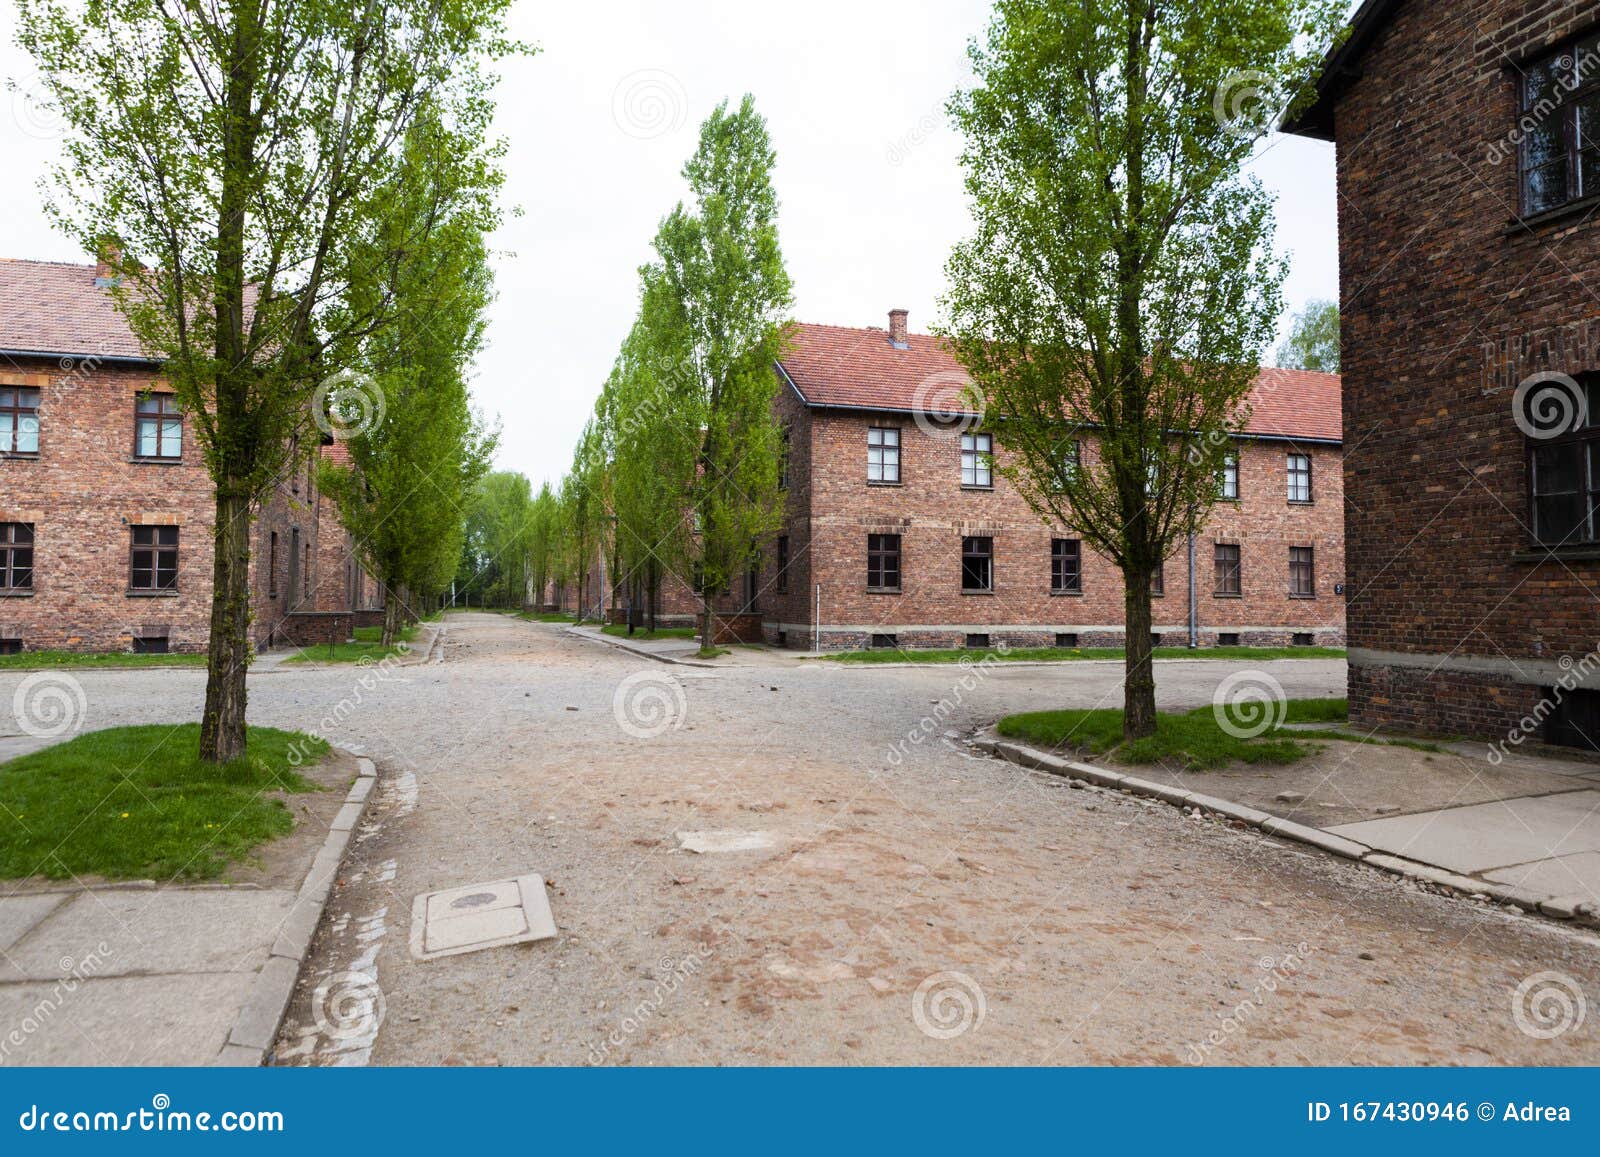 blocks from auschwitz concentration camp complex